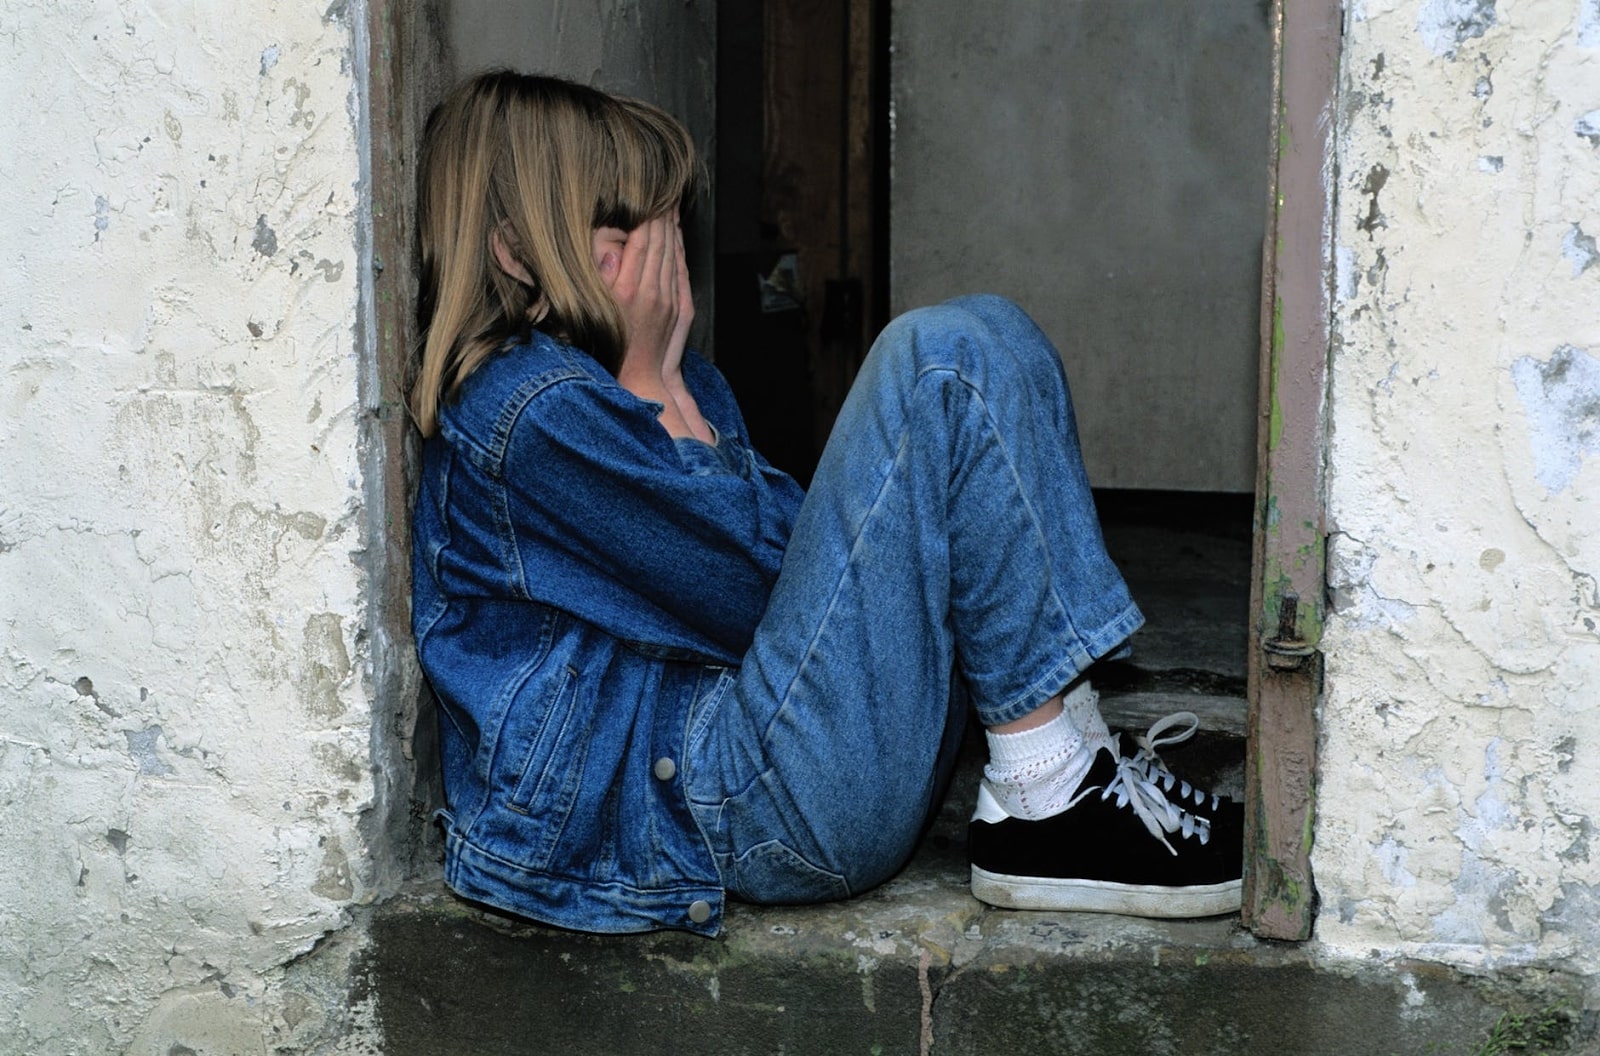 A concept photo of loneliness, showing a young girl from the side, wearing denim and covering her face, sitting in a small alcove.